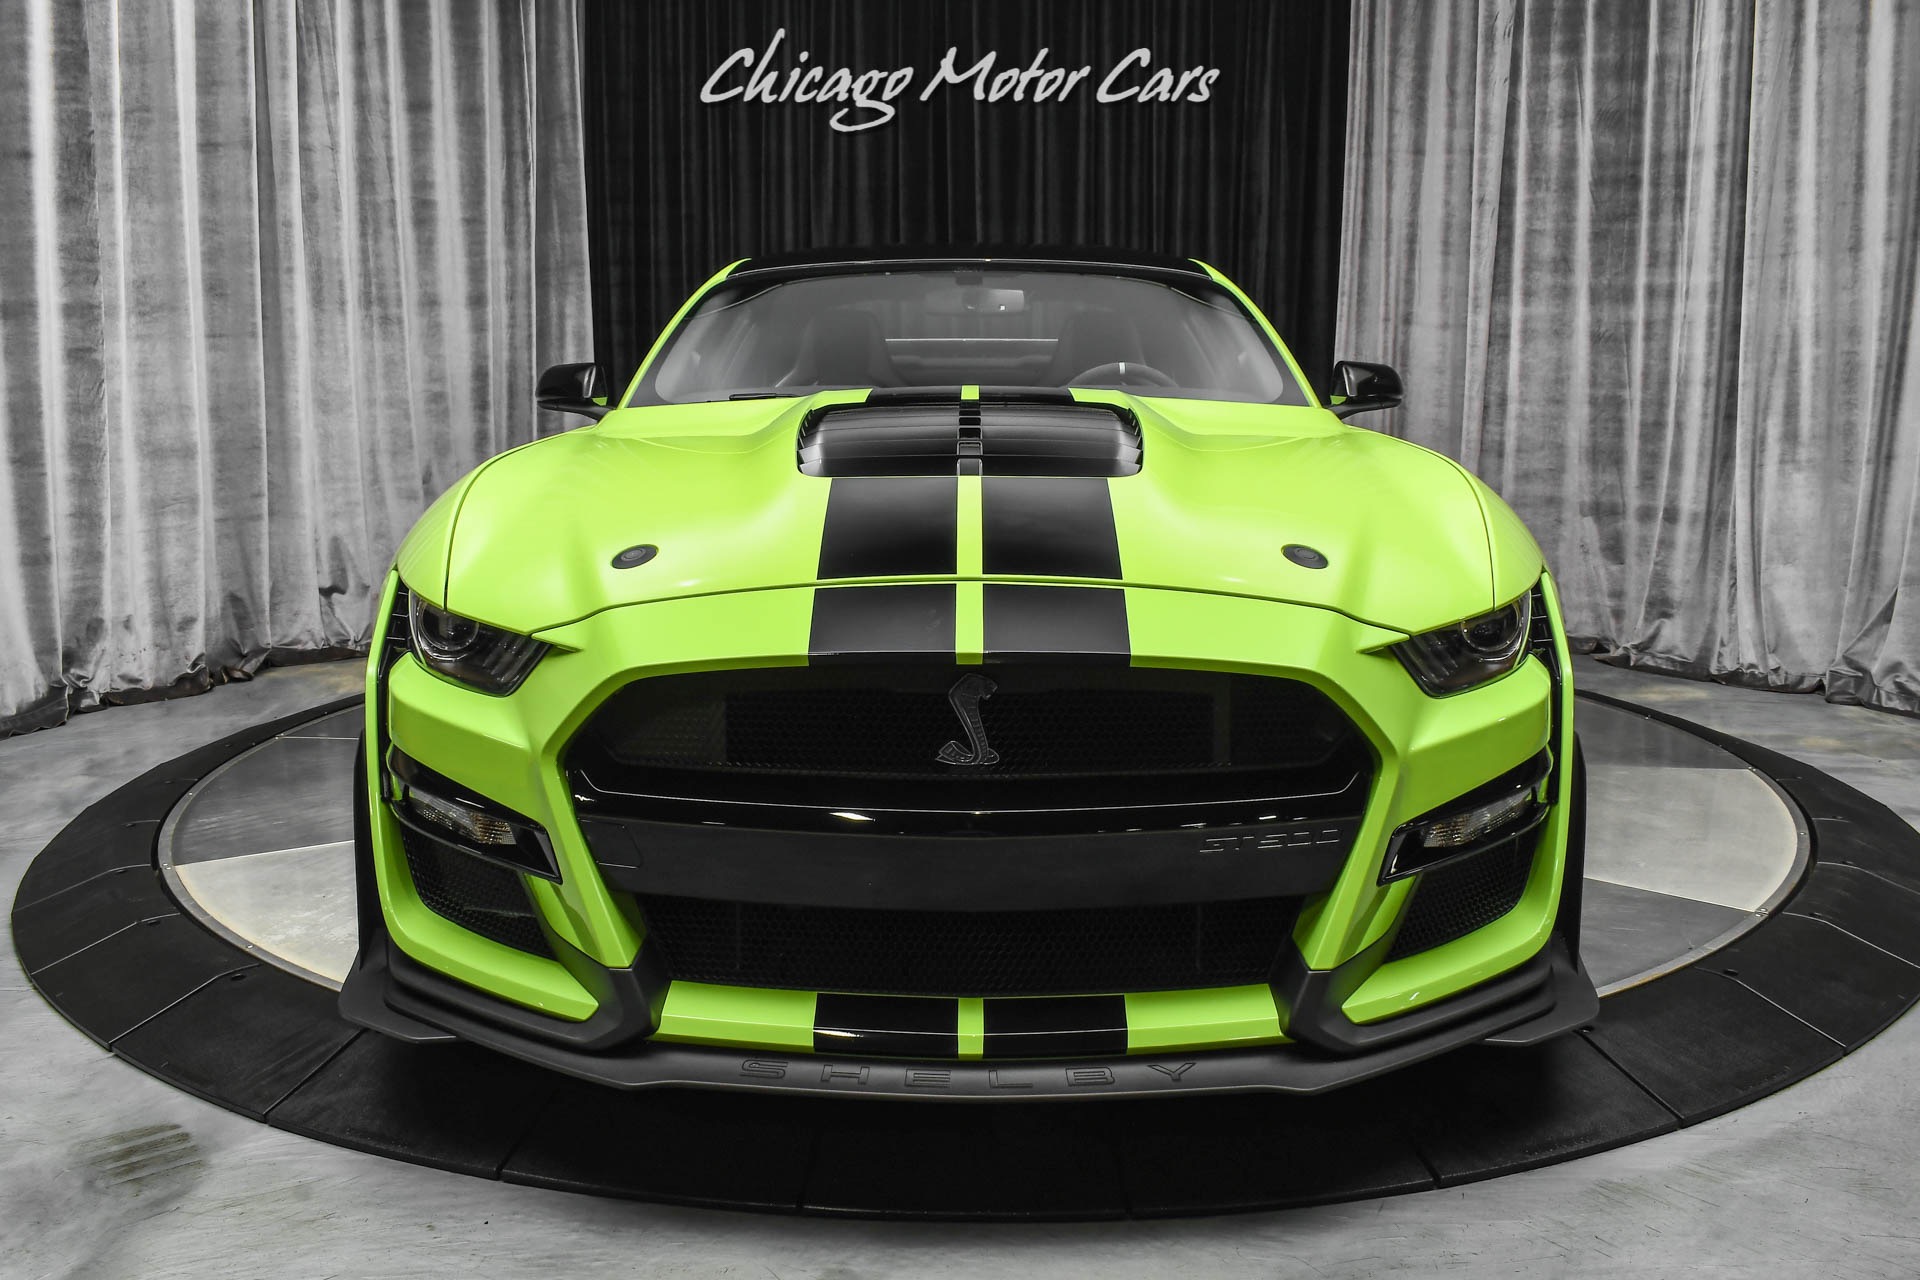 Used-2020-Ford-Mustang-Shelby-GT500-Coupe-ONLY-500-Miles-GOLDEN-TICKET-Carbon-Track-Pack-Carbon